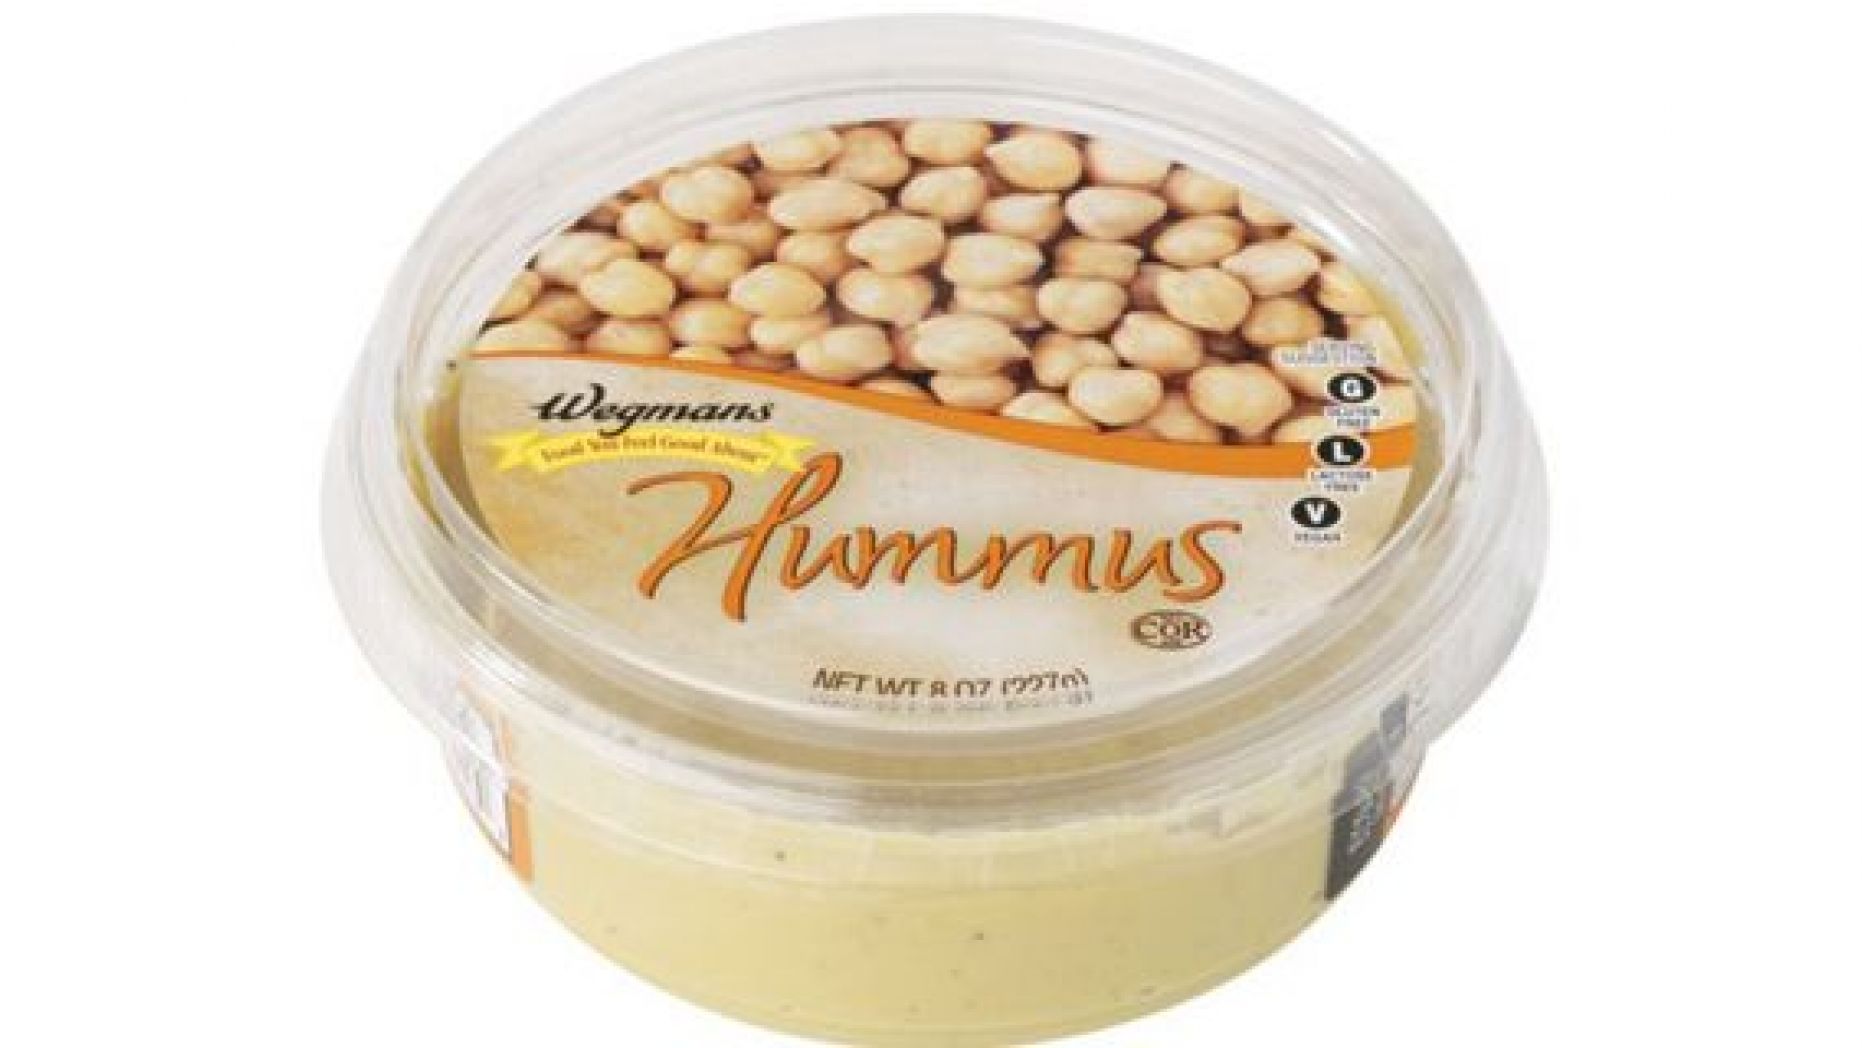 Wegmans is recalling its own hummus products, the company said Friday. 